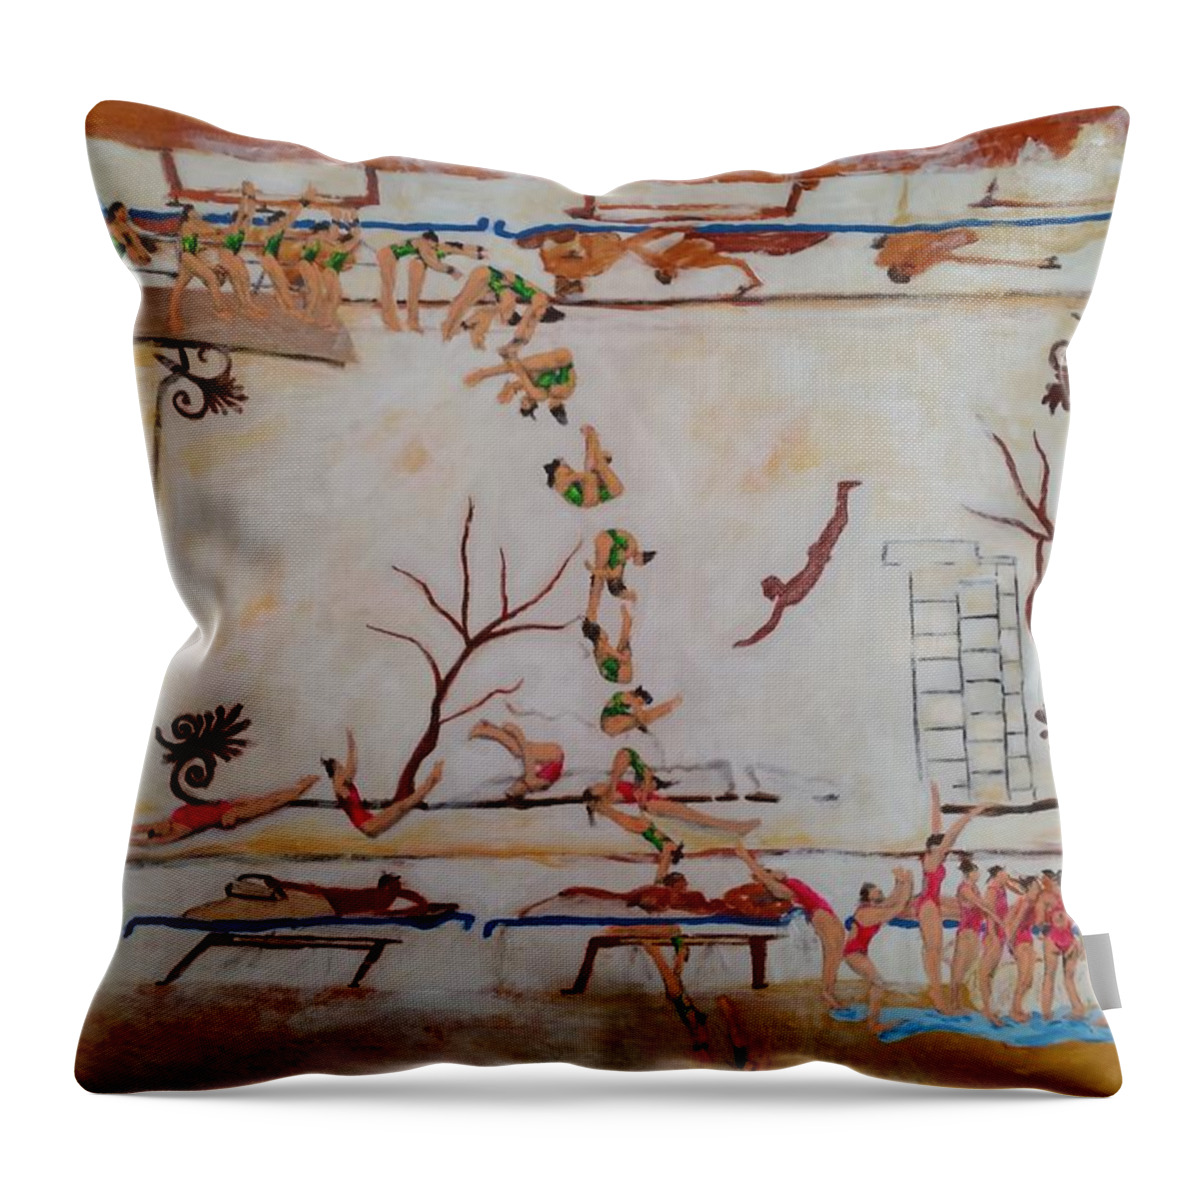 Tree Throw Pillow featuring the painting Kottabos by Bachmors Artist